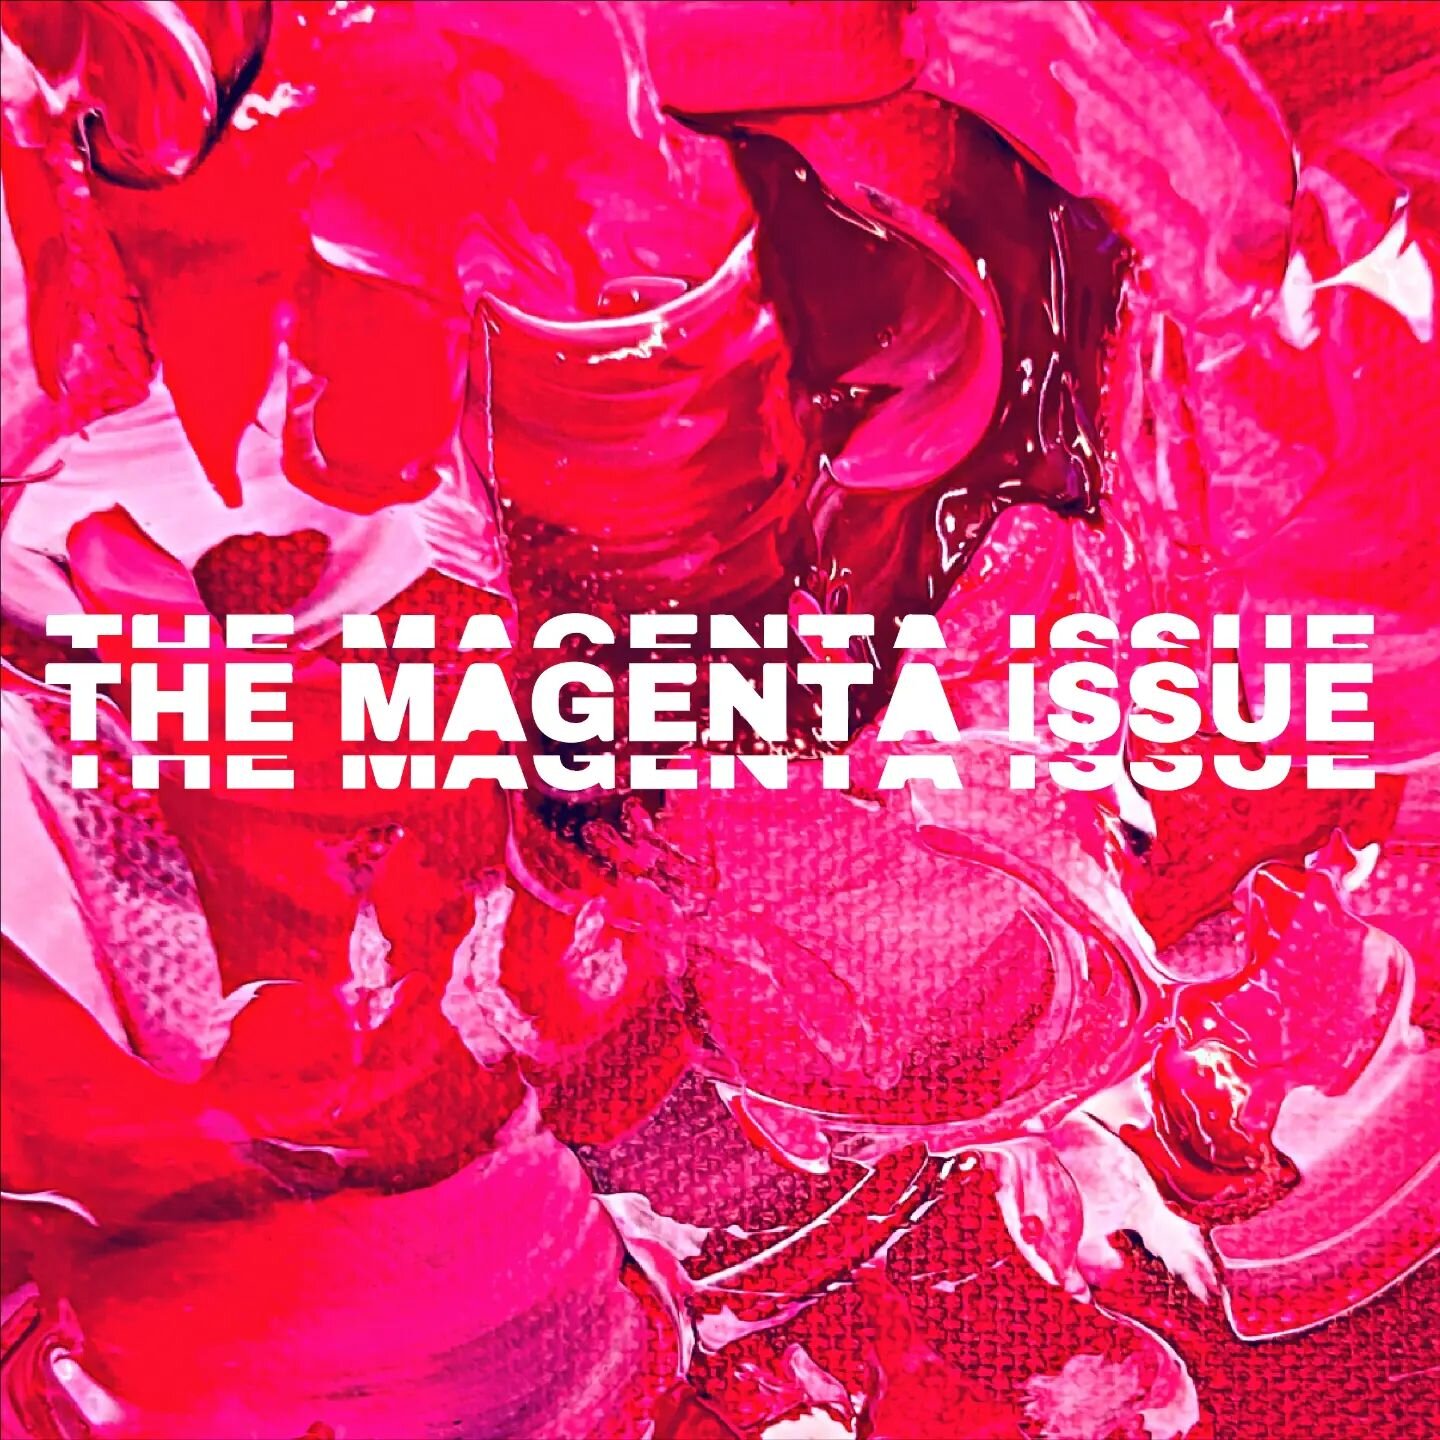 We&rsquo;ve talked about safe spaces- sharing and celebrating where we rest in a demanding world. This issue is the other side of the coin. Magenta, to us, is about strength and vitality. It&rsquo;s about being bold, messy, creative, and cheeky- usin